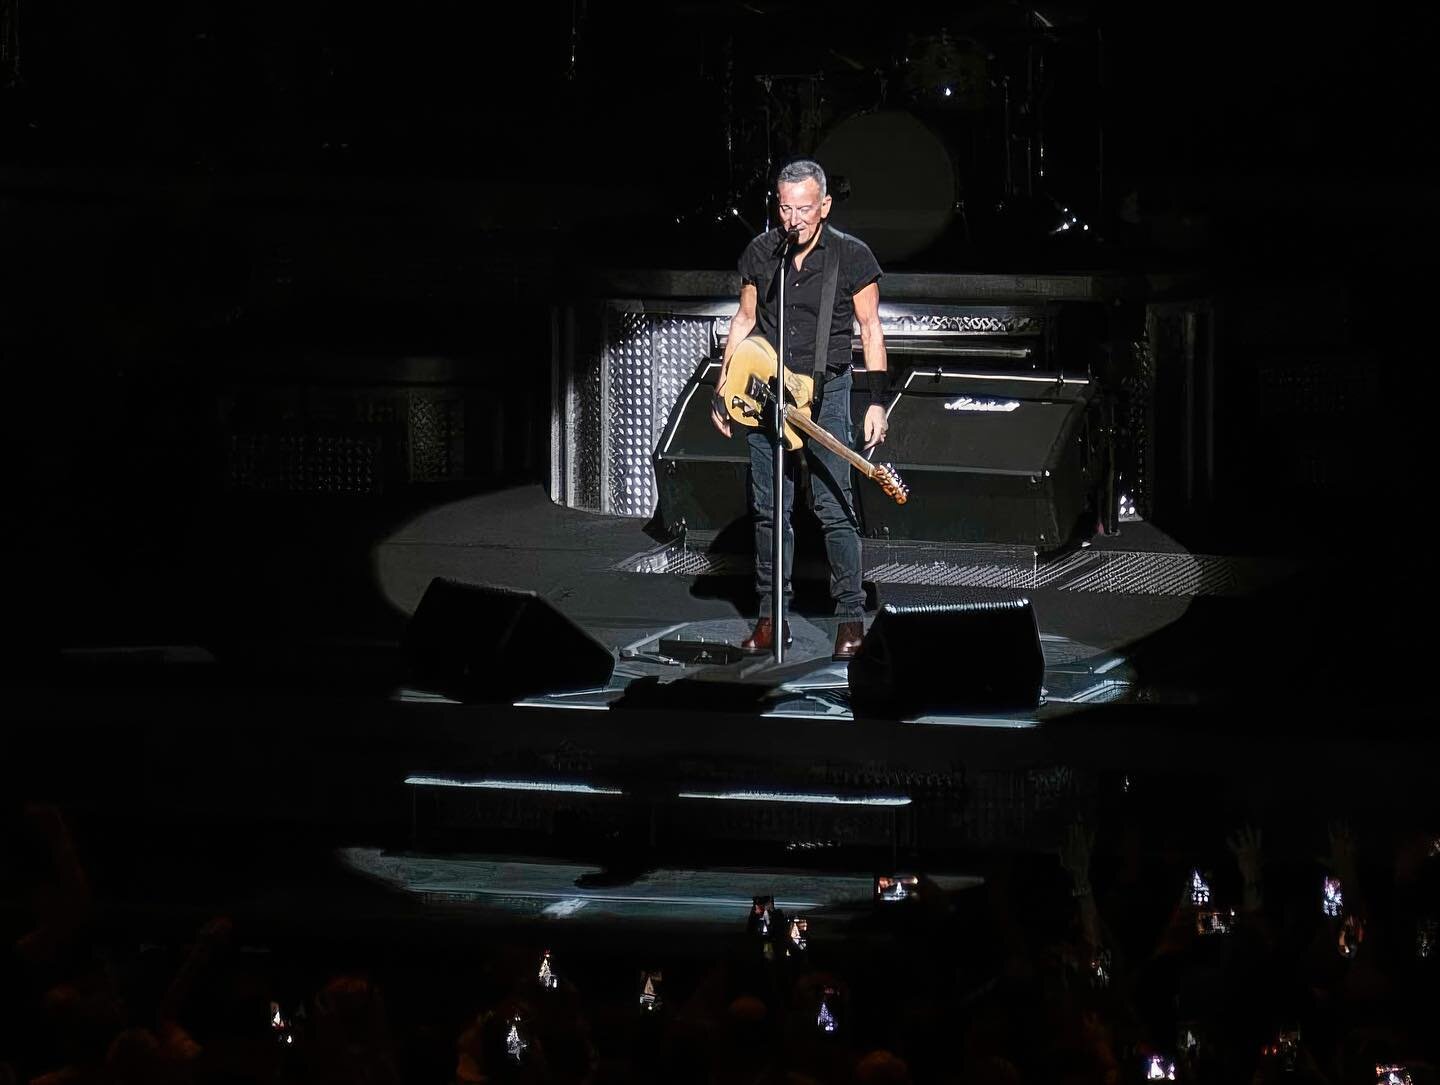 The Boss Proved It All Night In Cleveland 
#springsteen #brucespringsteen #theboss #estreetband #rocknroll #cle